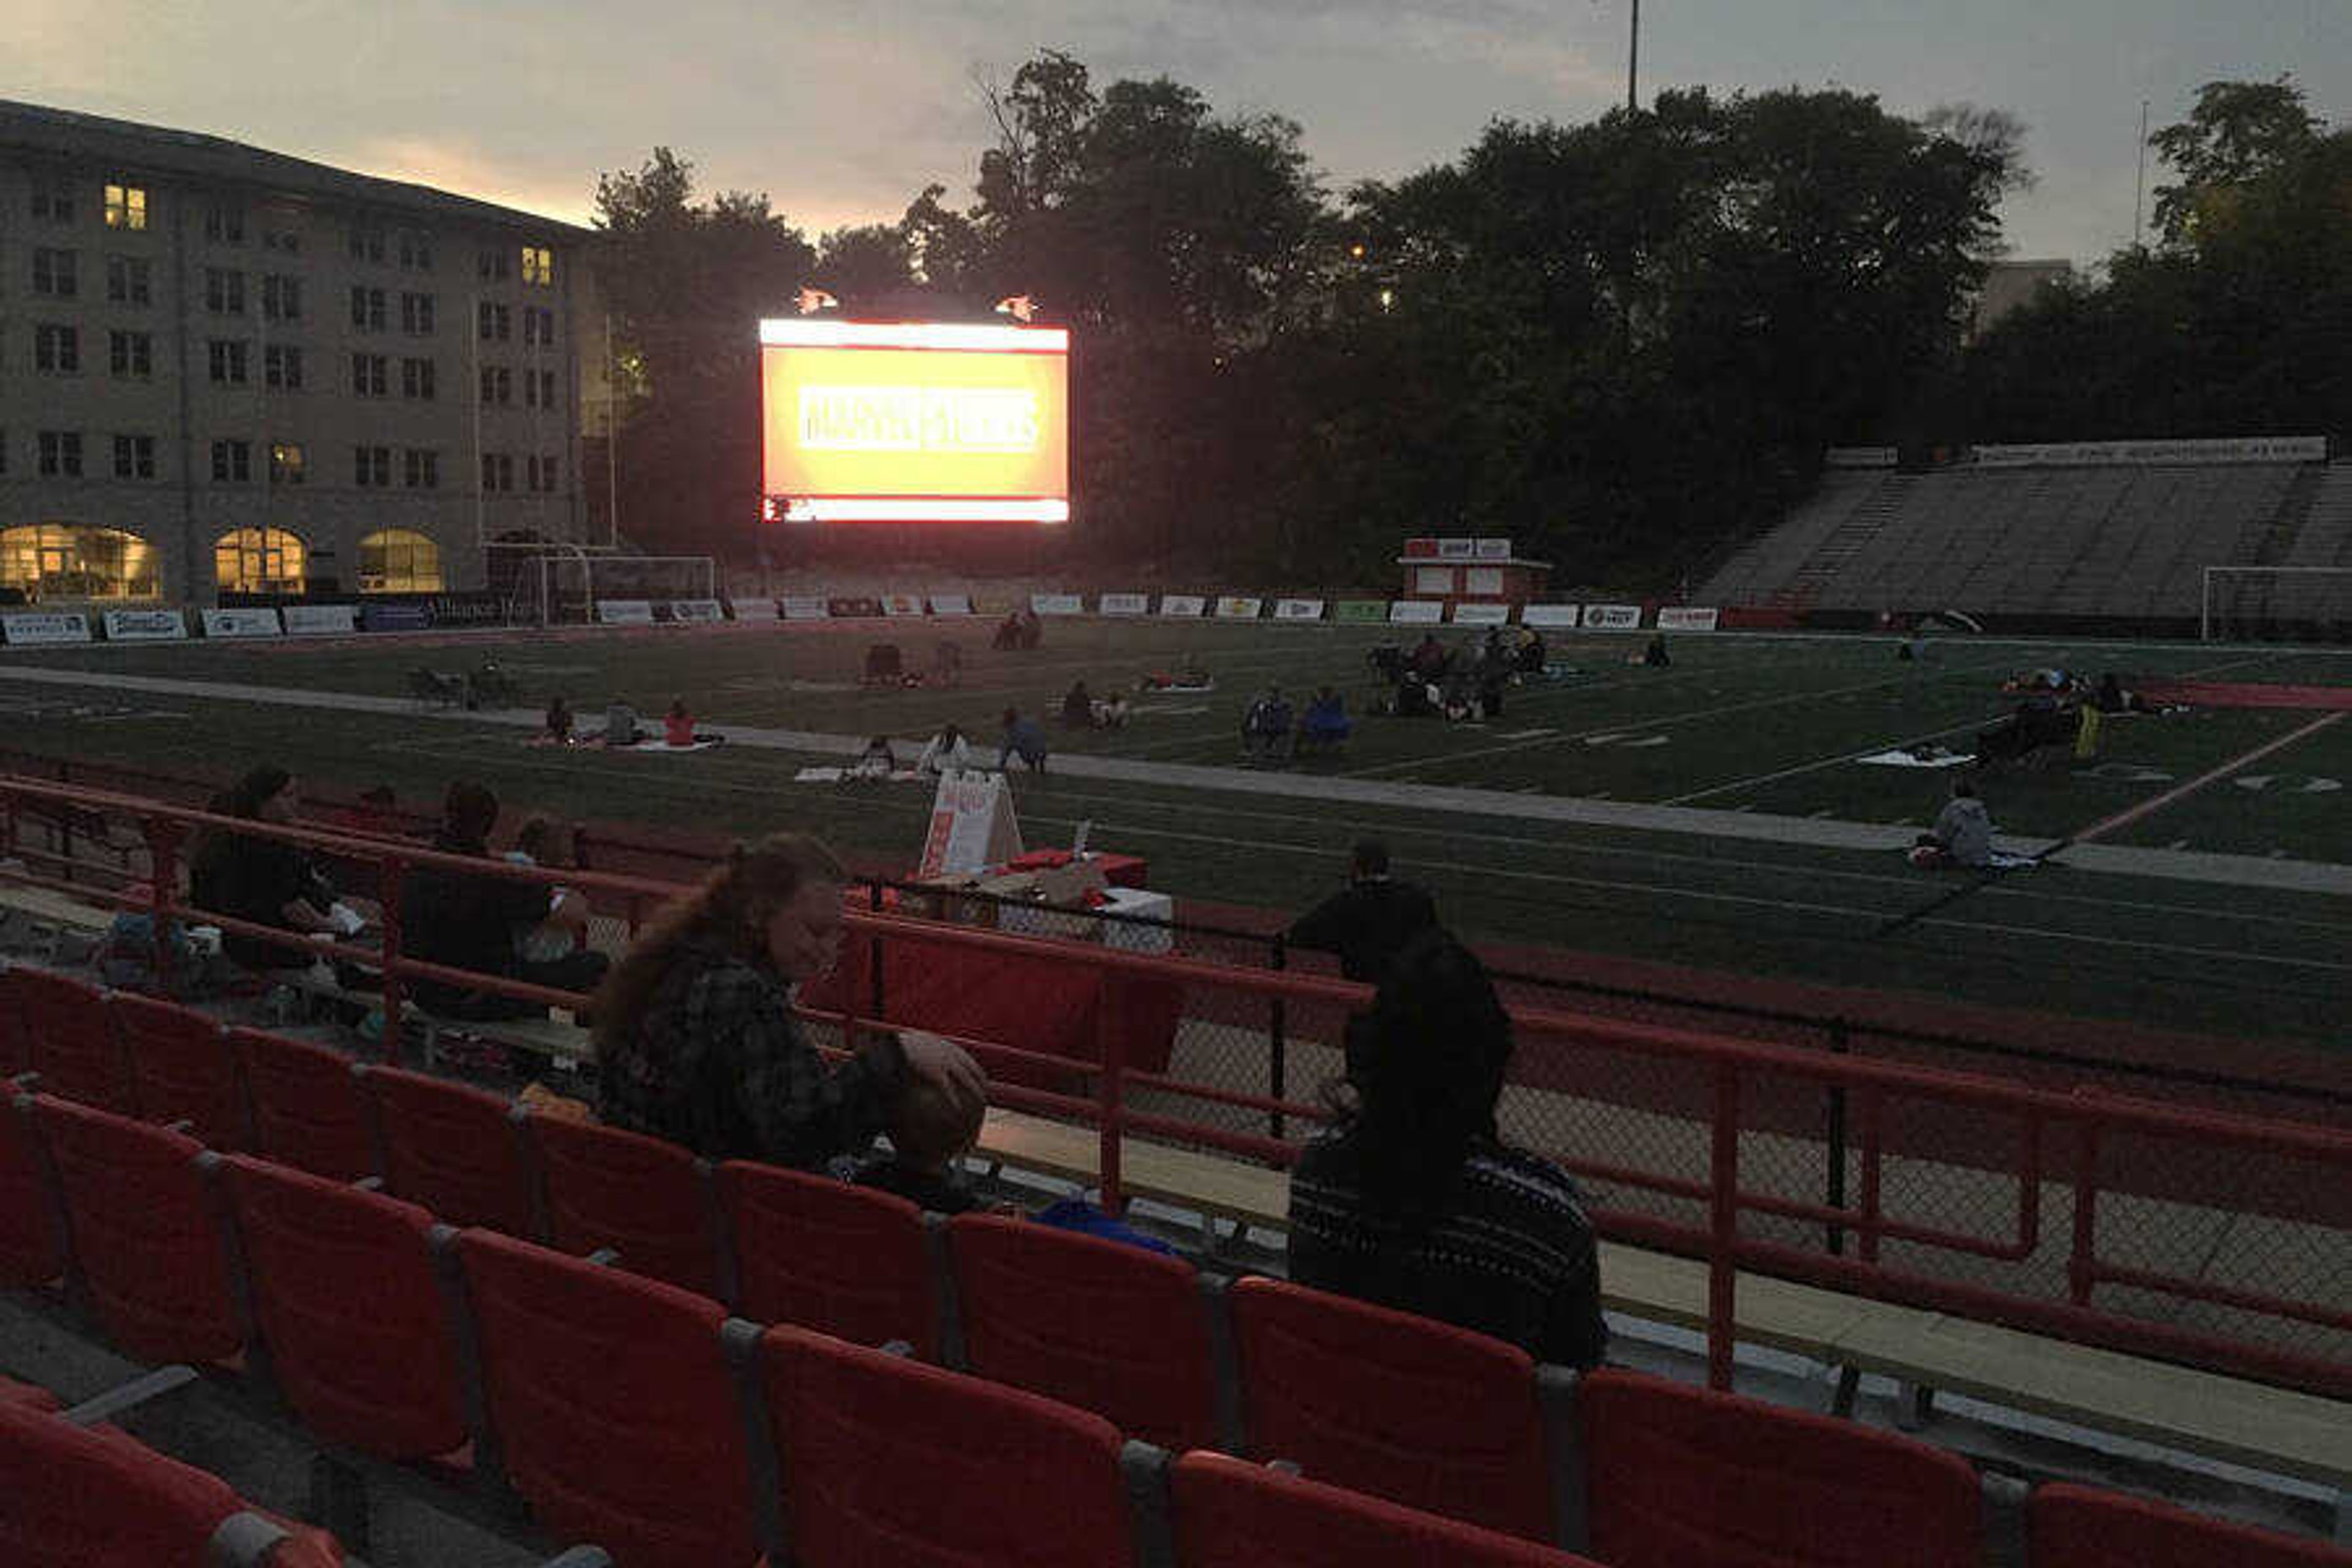 People prepare for “Black Panther” to start at Houck Field on Oct. 9, 2020. Viewers sit either in the stands or the fields.